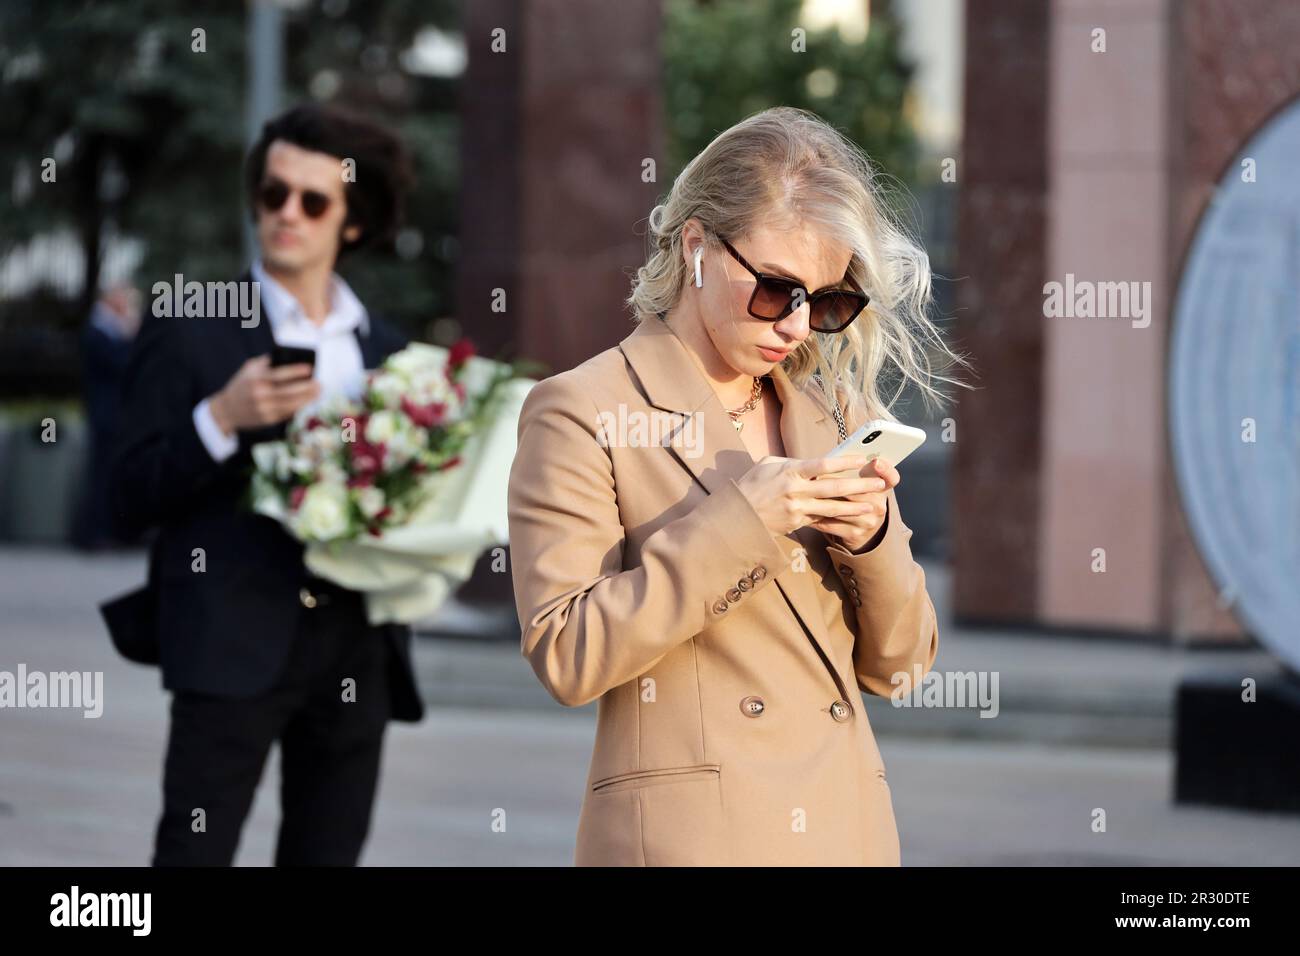 Blonde girl in sunglasses standing with smartphone in hands on city street on background of man with bouqet of flowers Stock Photo